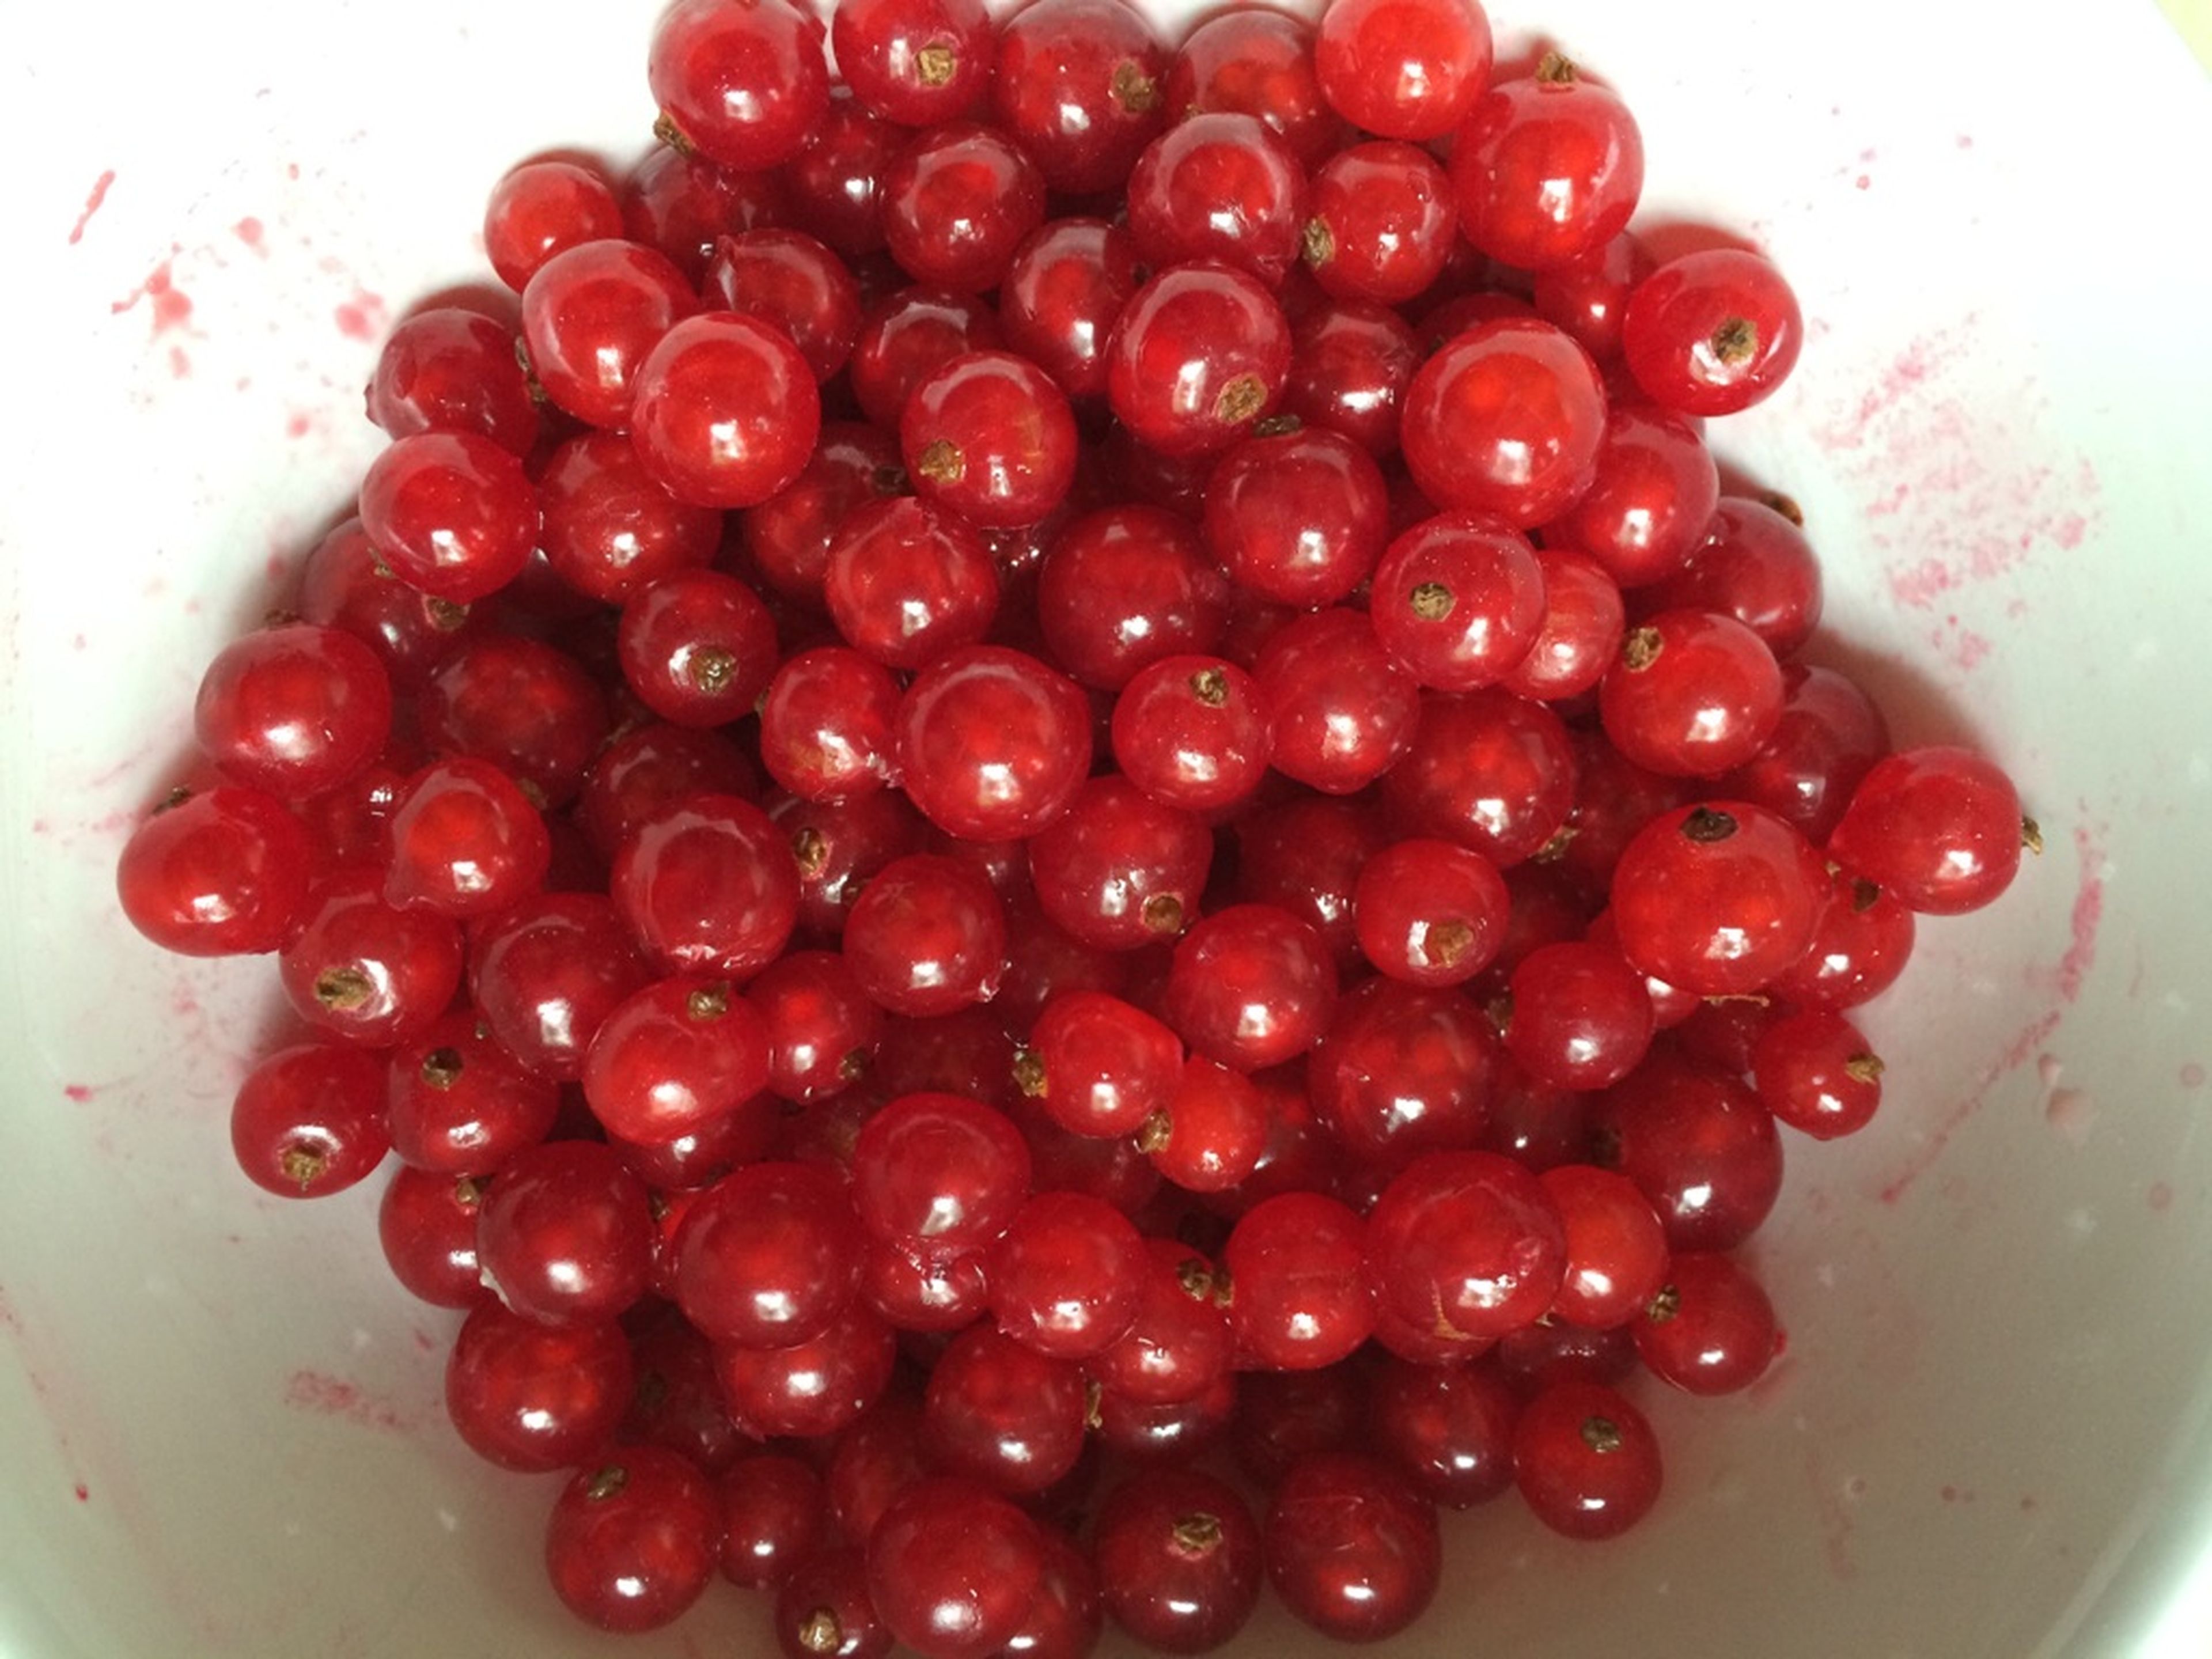 Preheat the oven to 180°C/375°F. Wash the red currants and remove them from their stems.